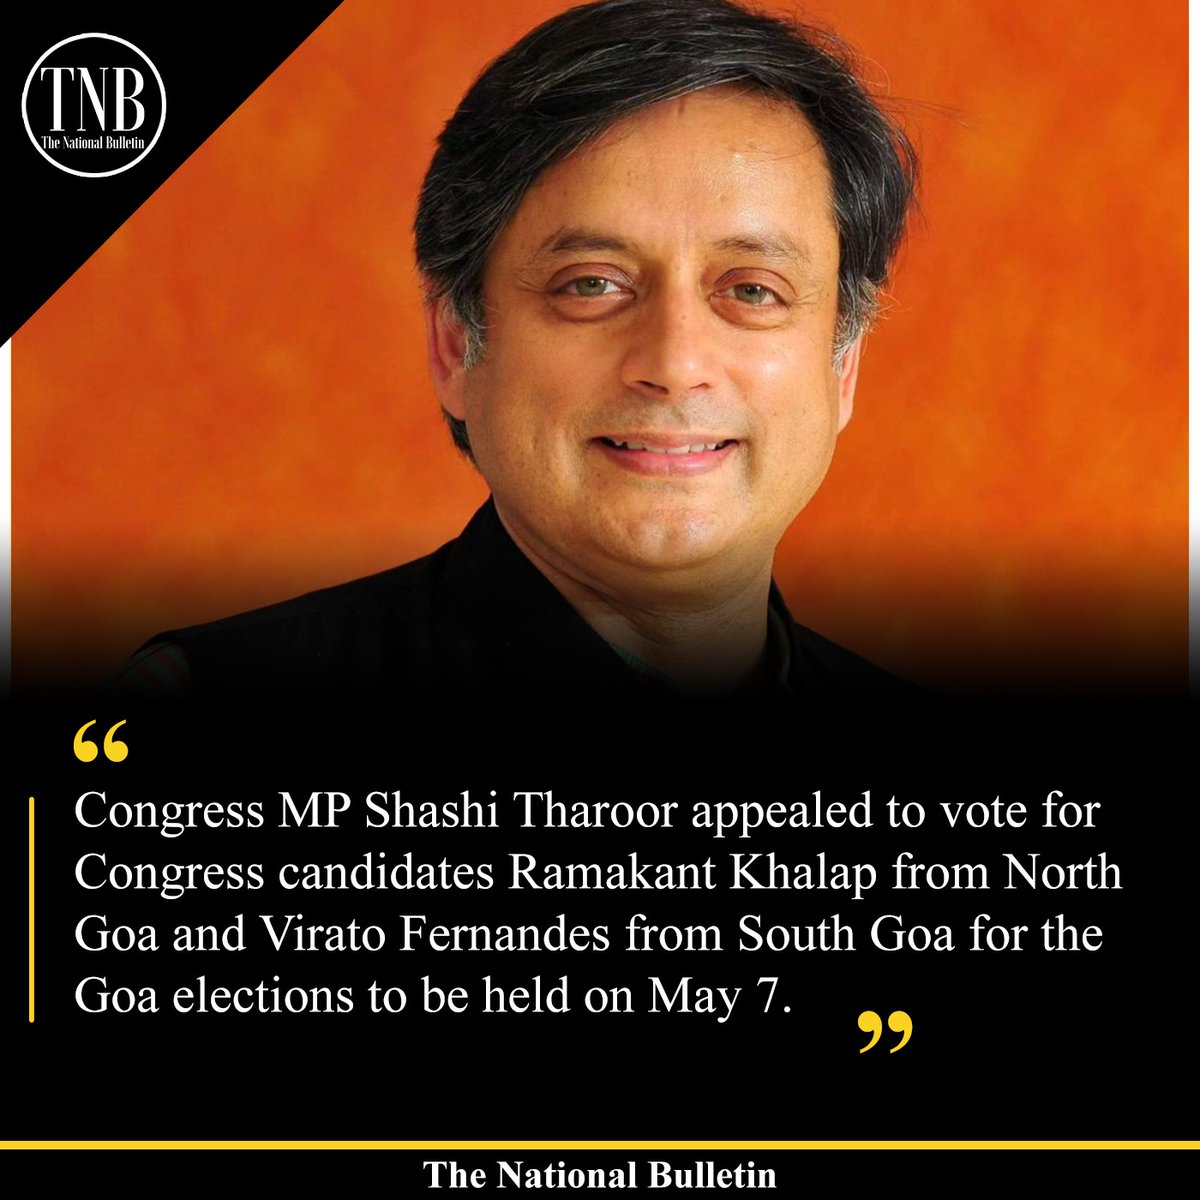 Congress MP Shashi Tharoor appealed to vote for Congress candidates Ramakant Khalap from North Goa and Virato Fernandes from South Goa for the Goa elections to be held on May 7. @ShashiTharoor #Congress #Goa #LokSabhaElections2024 #LokSabhaElctions2024 #LokSabhaElction2024…